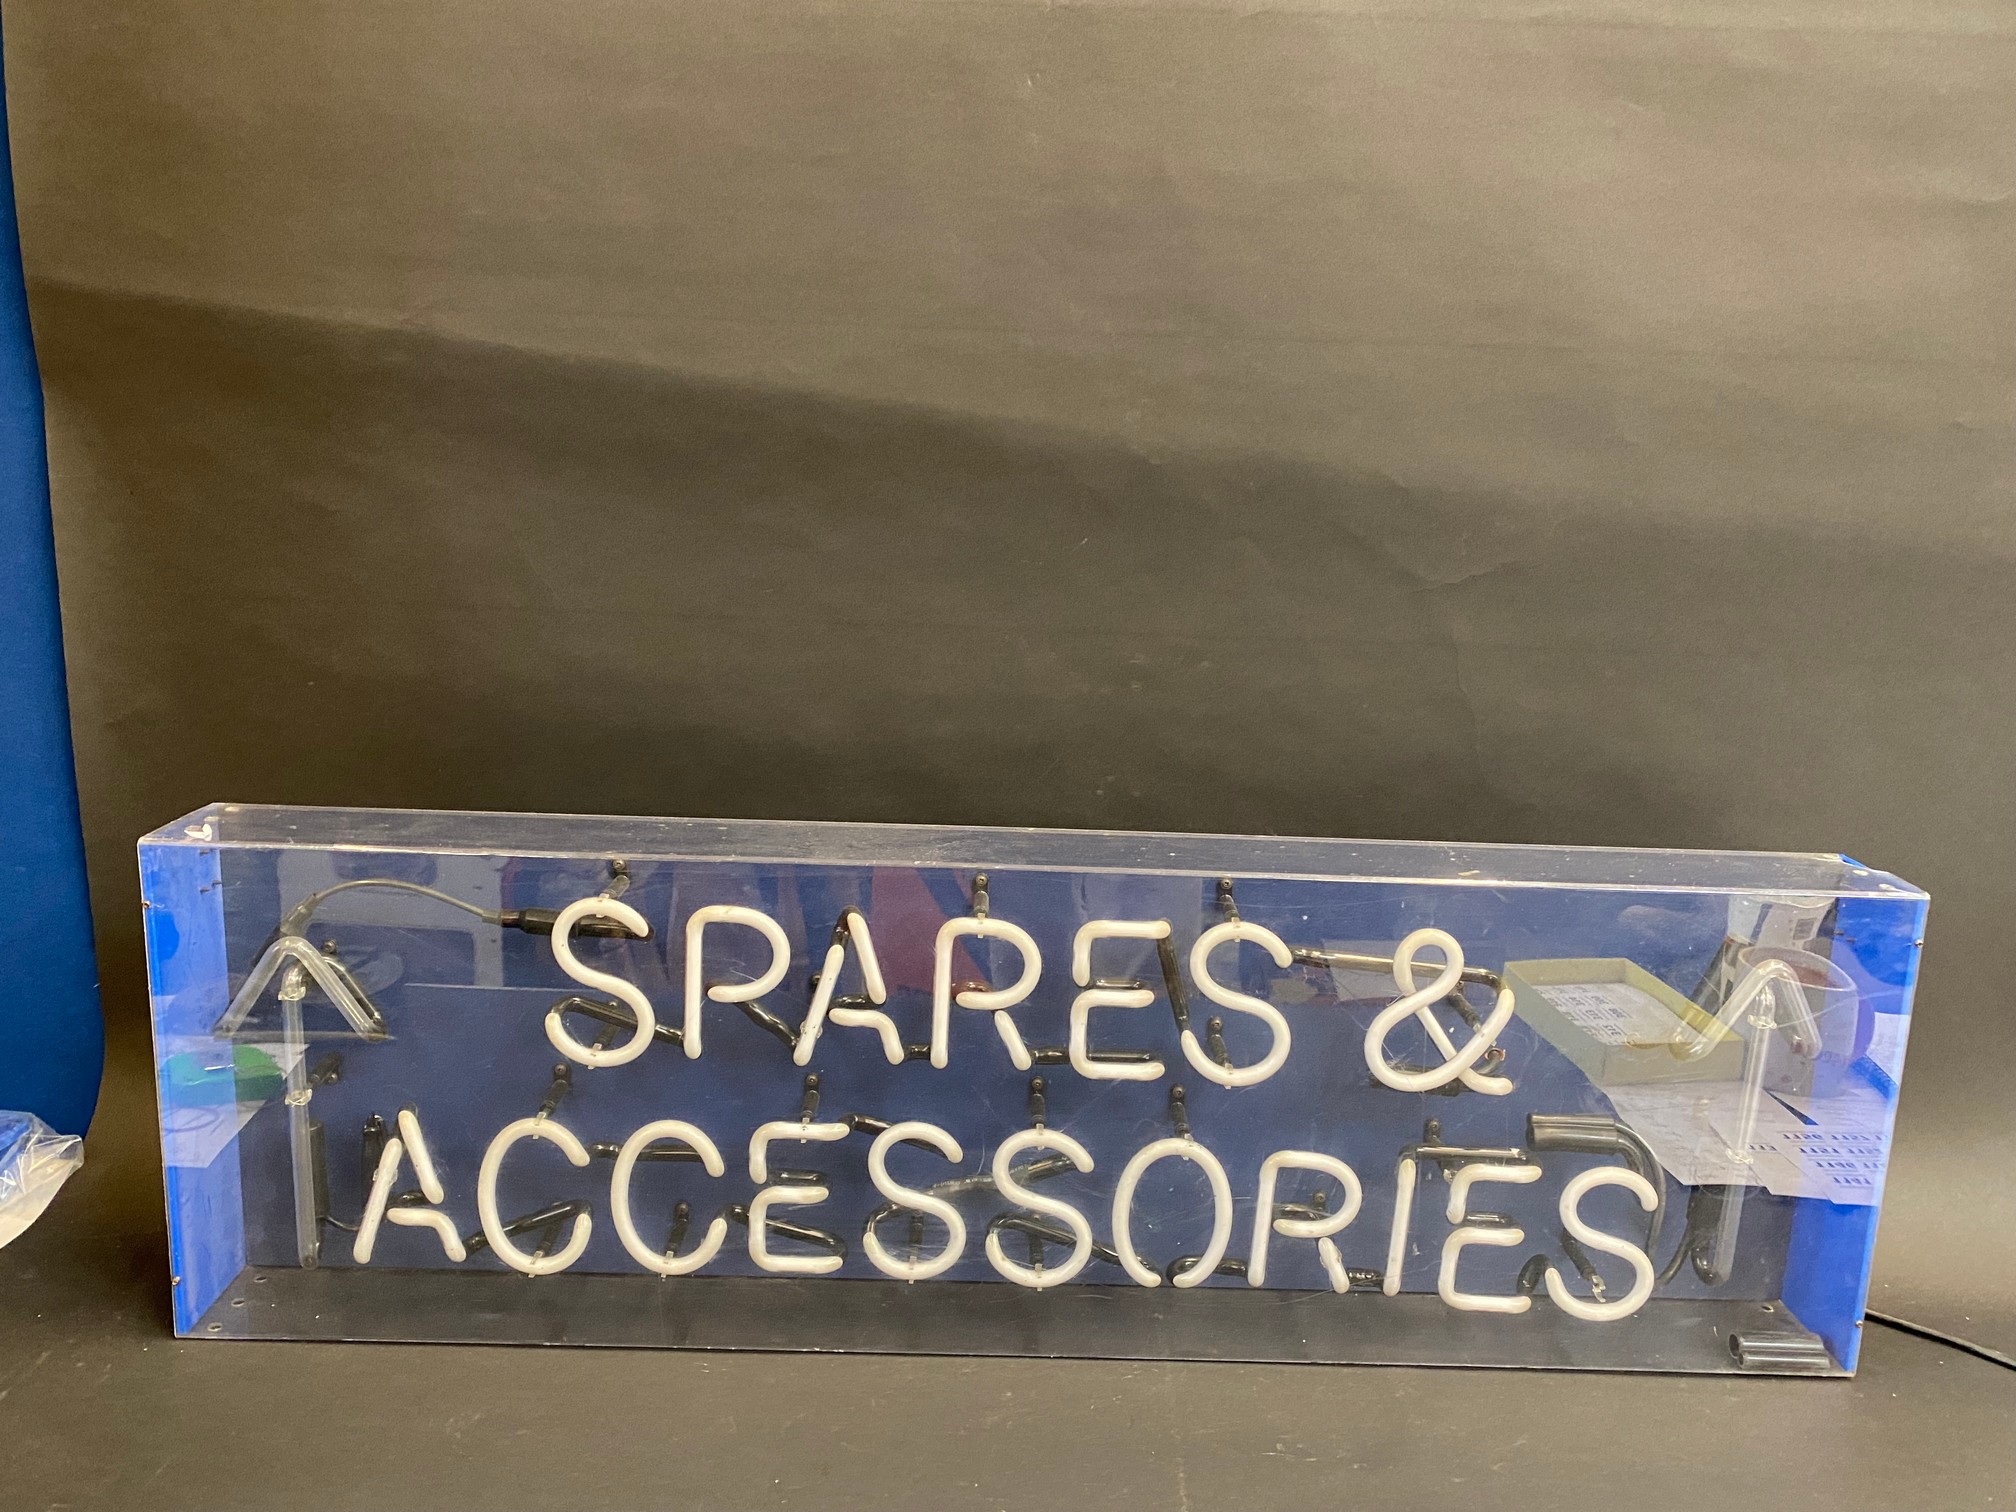 A rectangular garage showroom flashing neon lightbox for 'Spares & Accessories', 39 1/2" wide x - Image 4 of 4